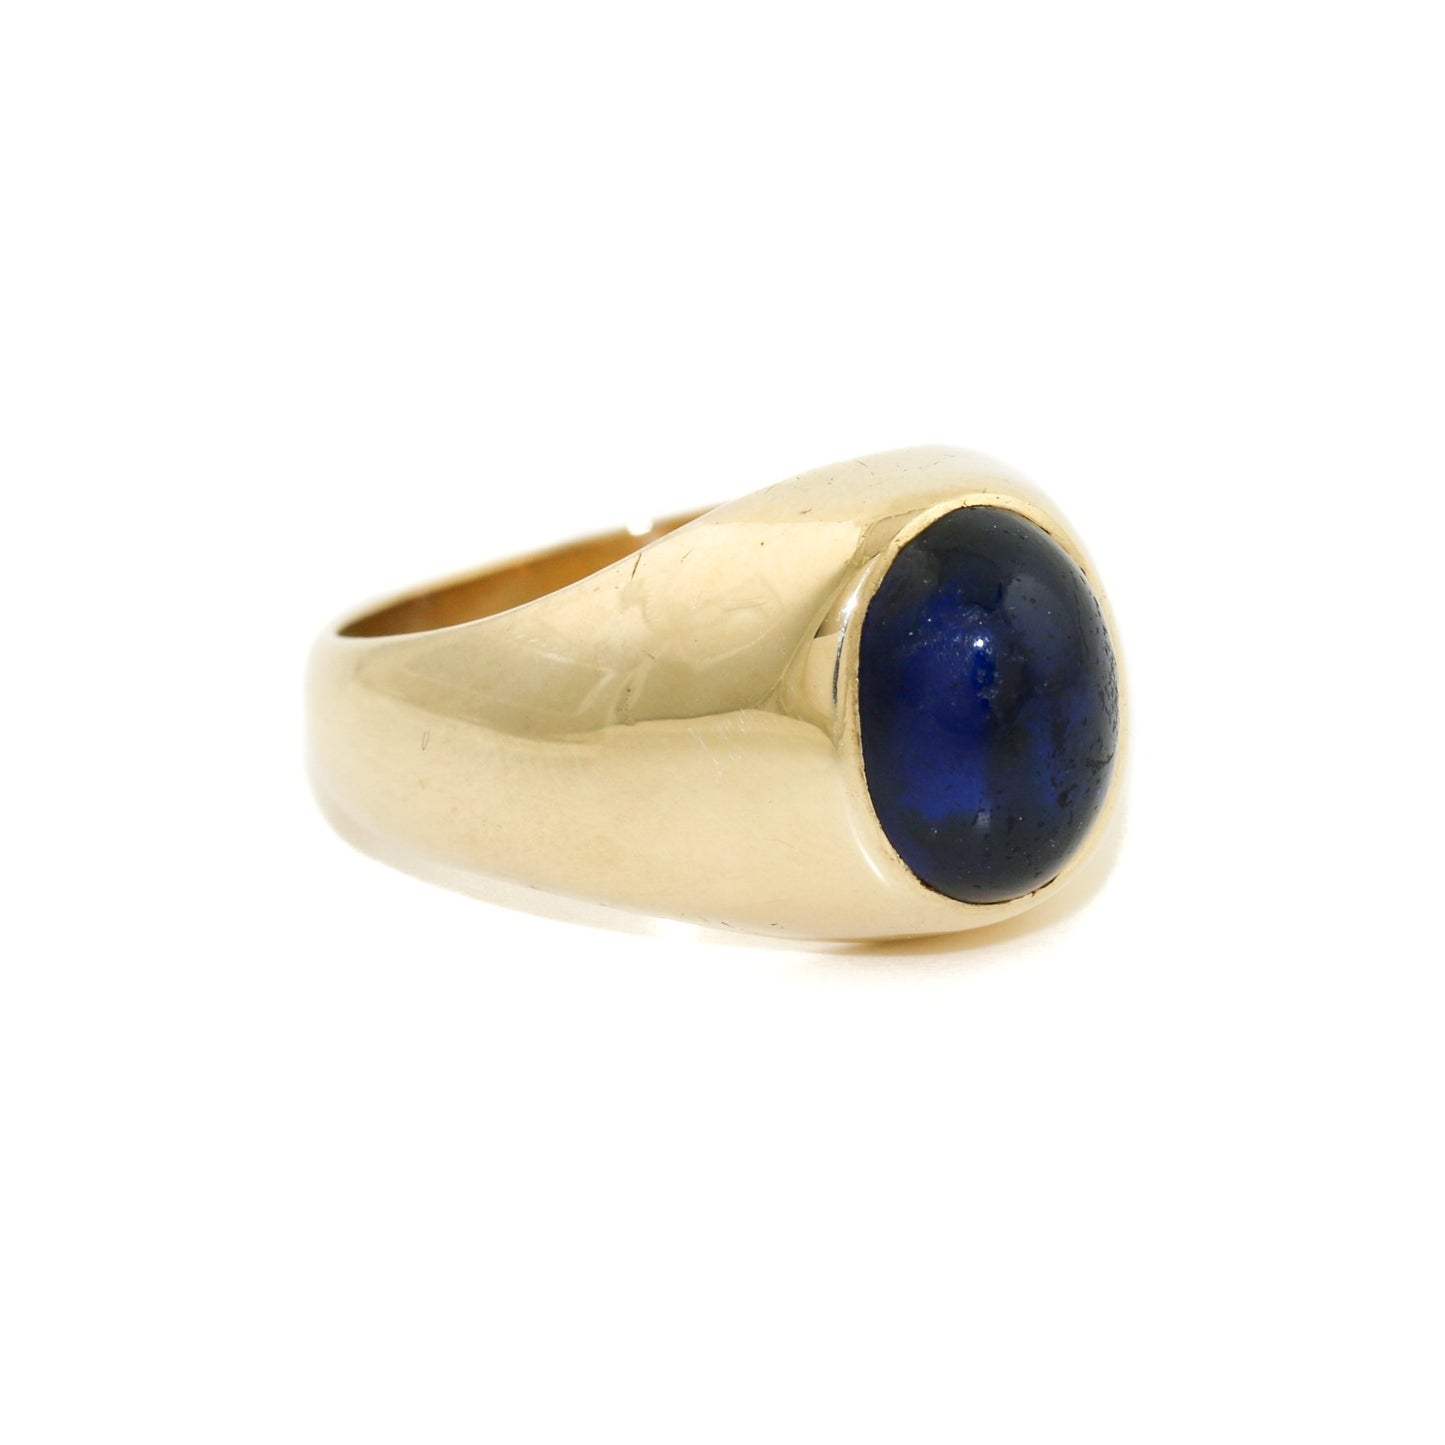 Vintage 10k Gold Synthetic Sapphire Ring - Kingdom Jewelry